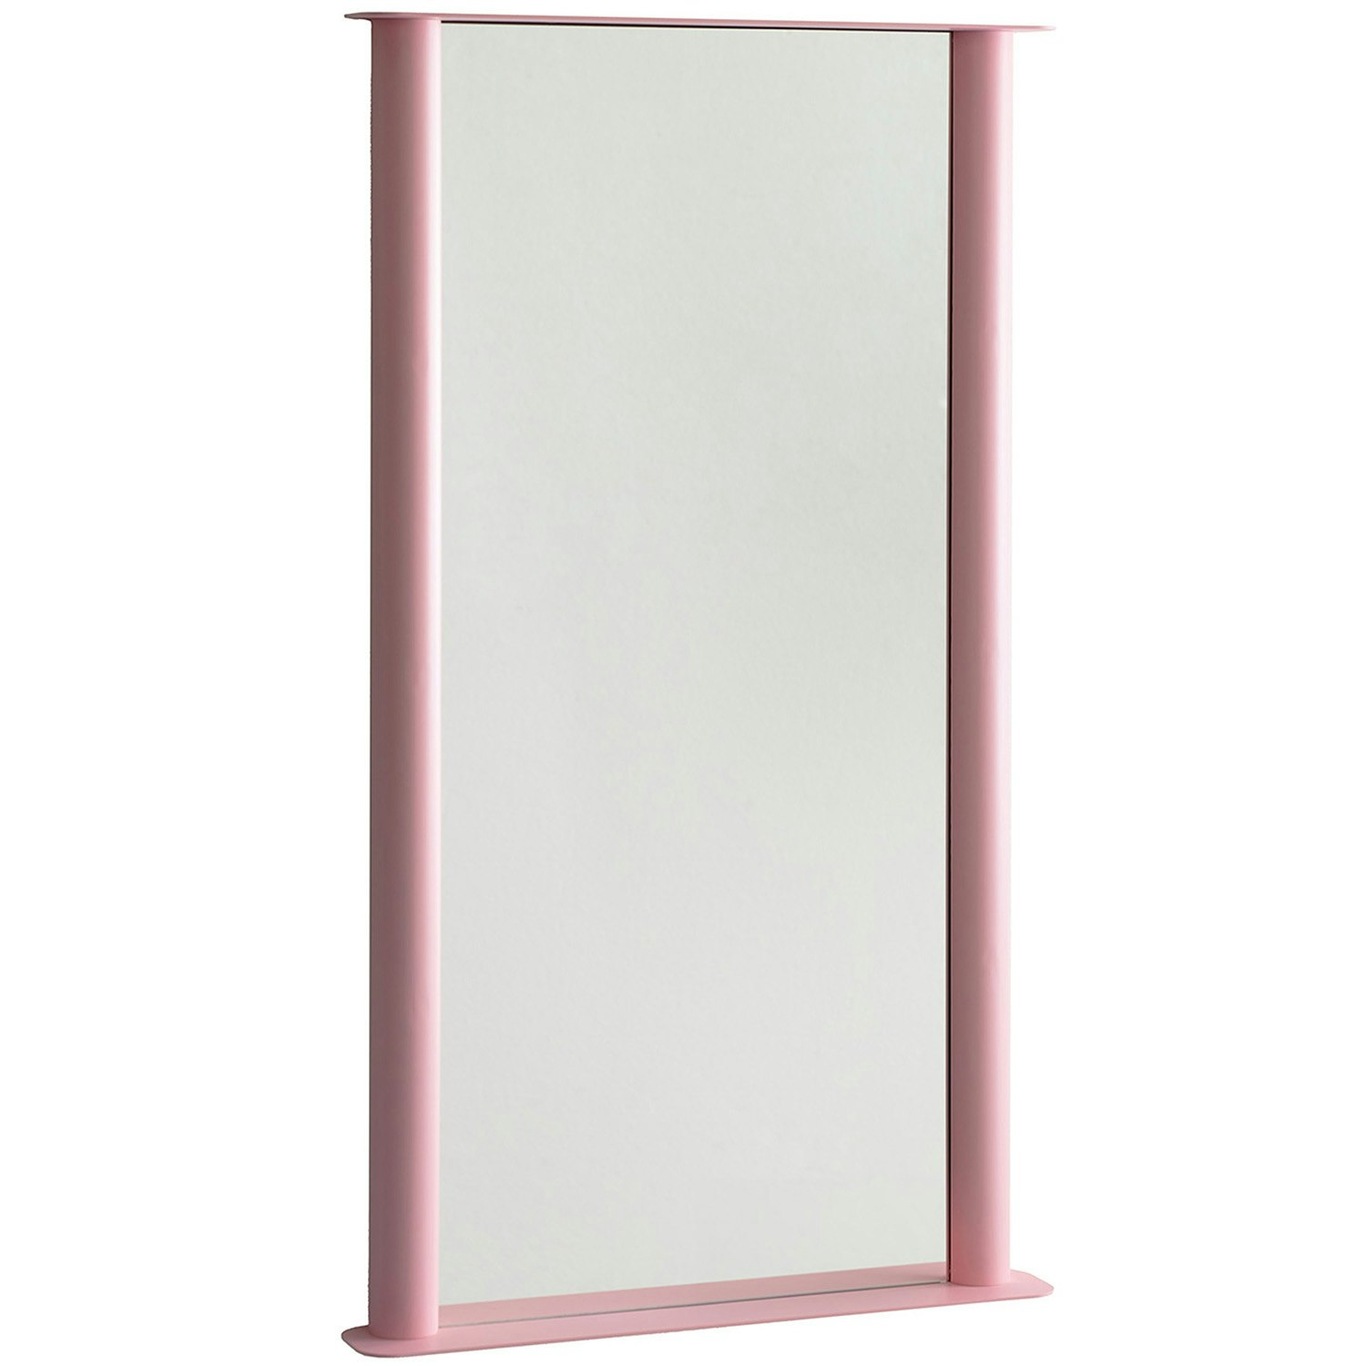 Pipeline Wall Mirror 66x117.5 cm, Pink